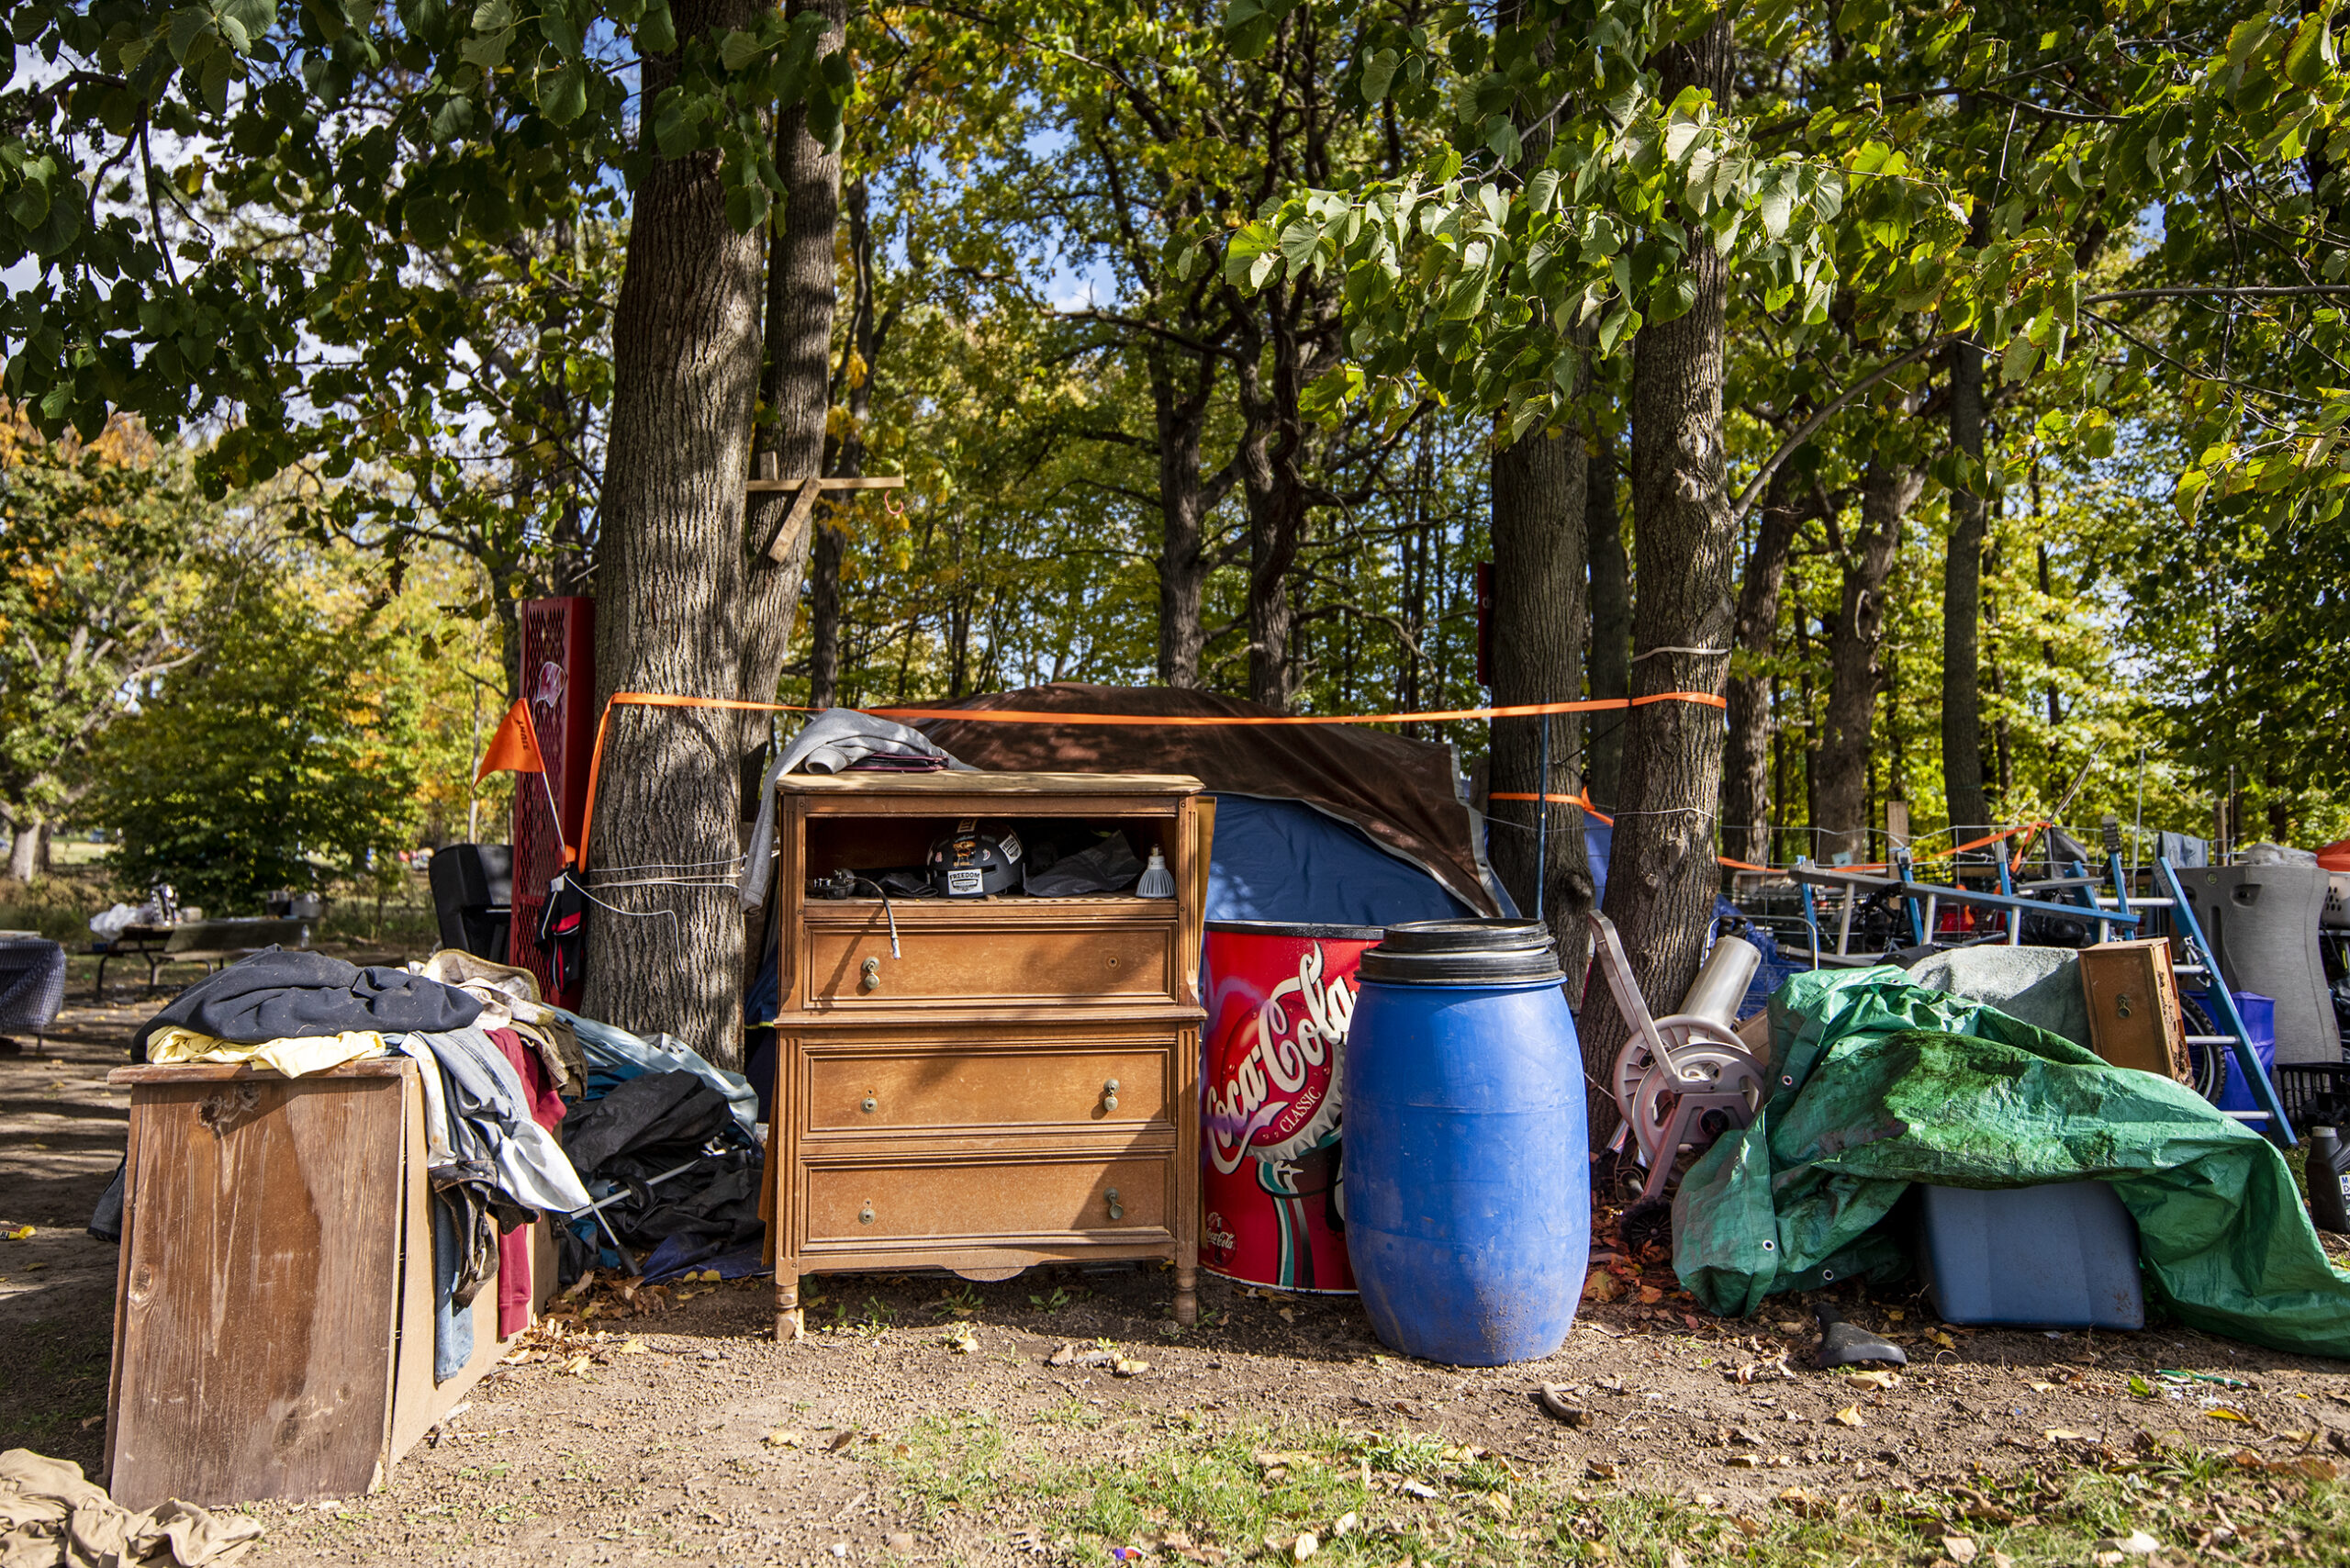 A dresser, a trash can, and other belongings are kept near trees in the park.